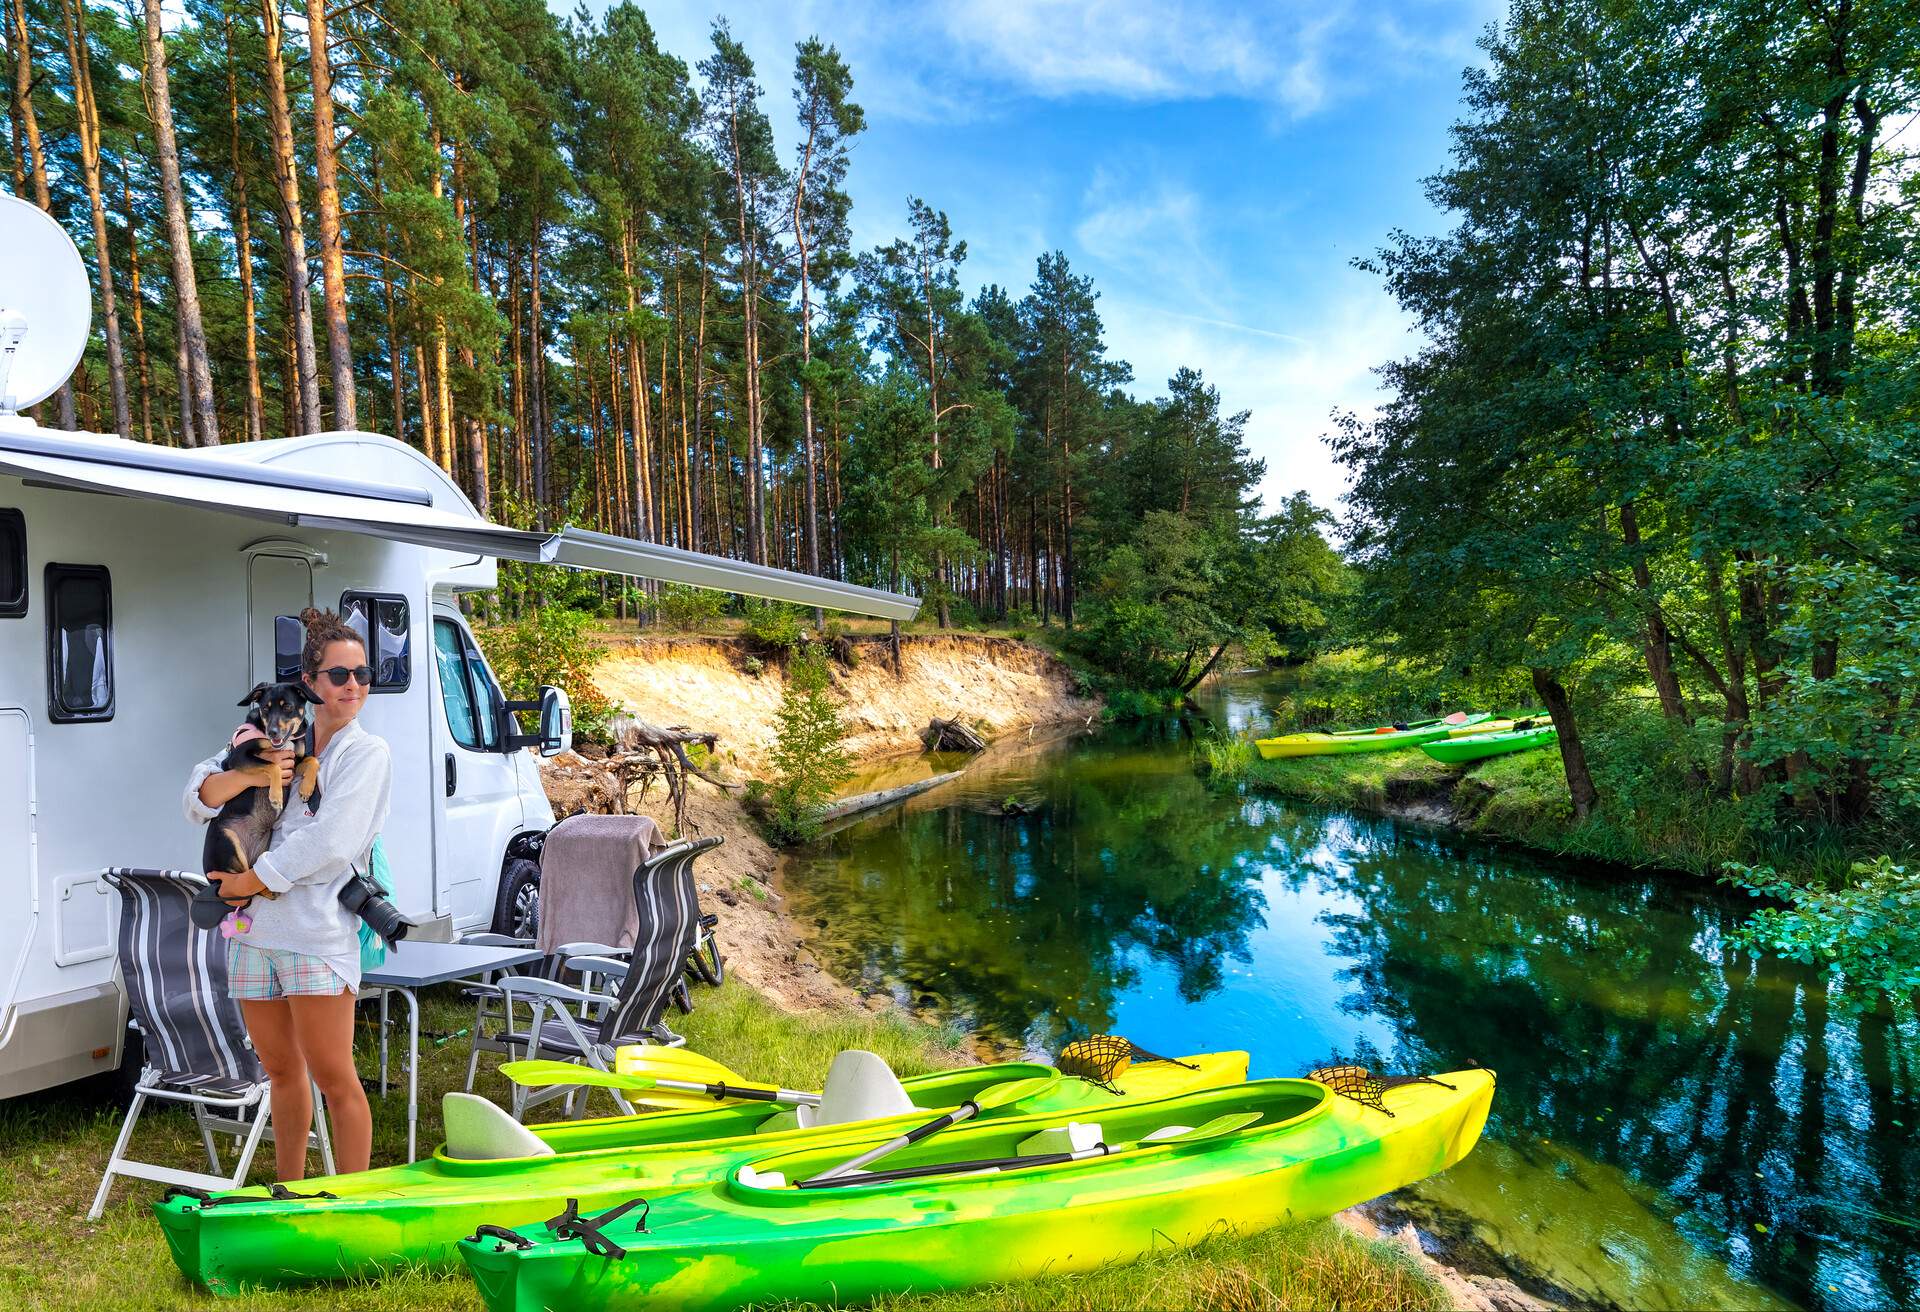 DEST_POLAND_MAZURY_KRUTYNIA-RIVER_THEME_NATURE_CAMPING_KAYAKING_GettyImages-1138556756